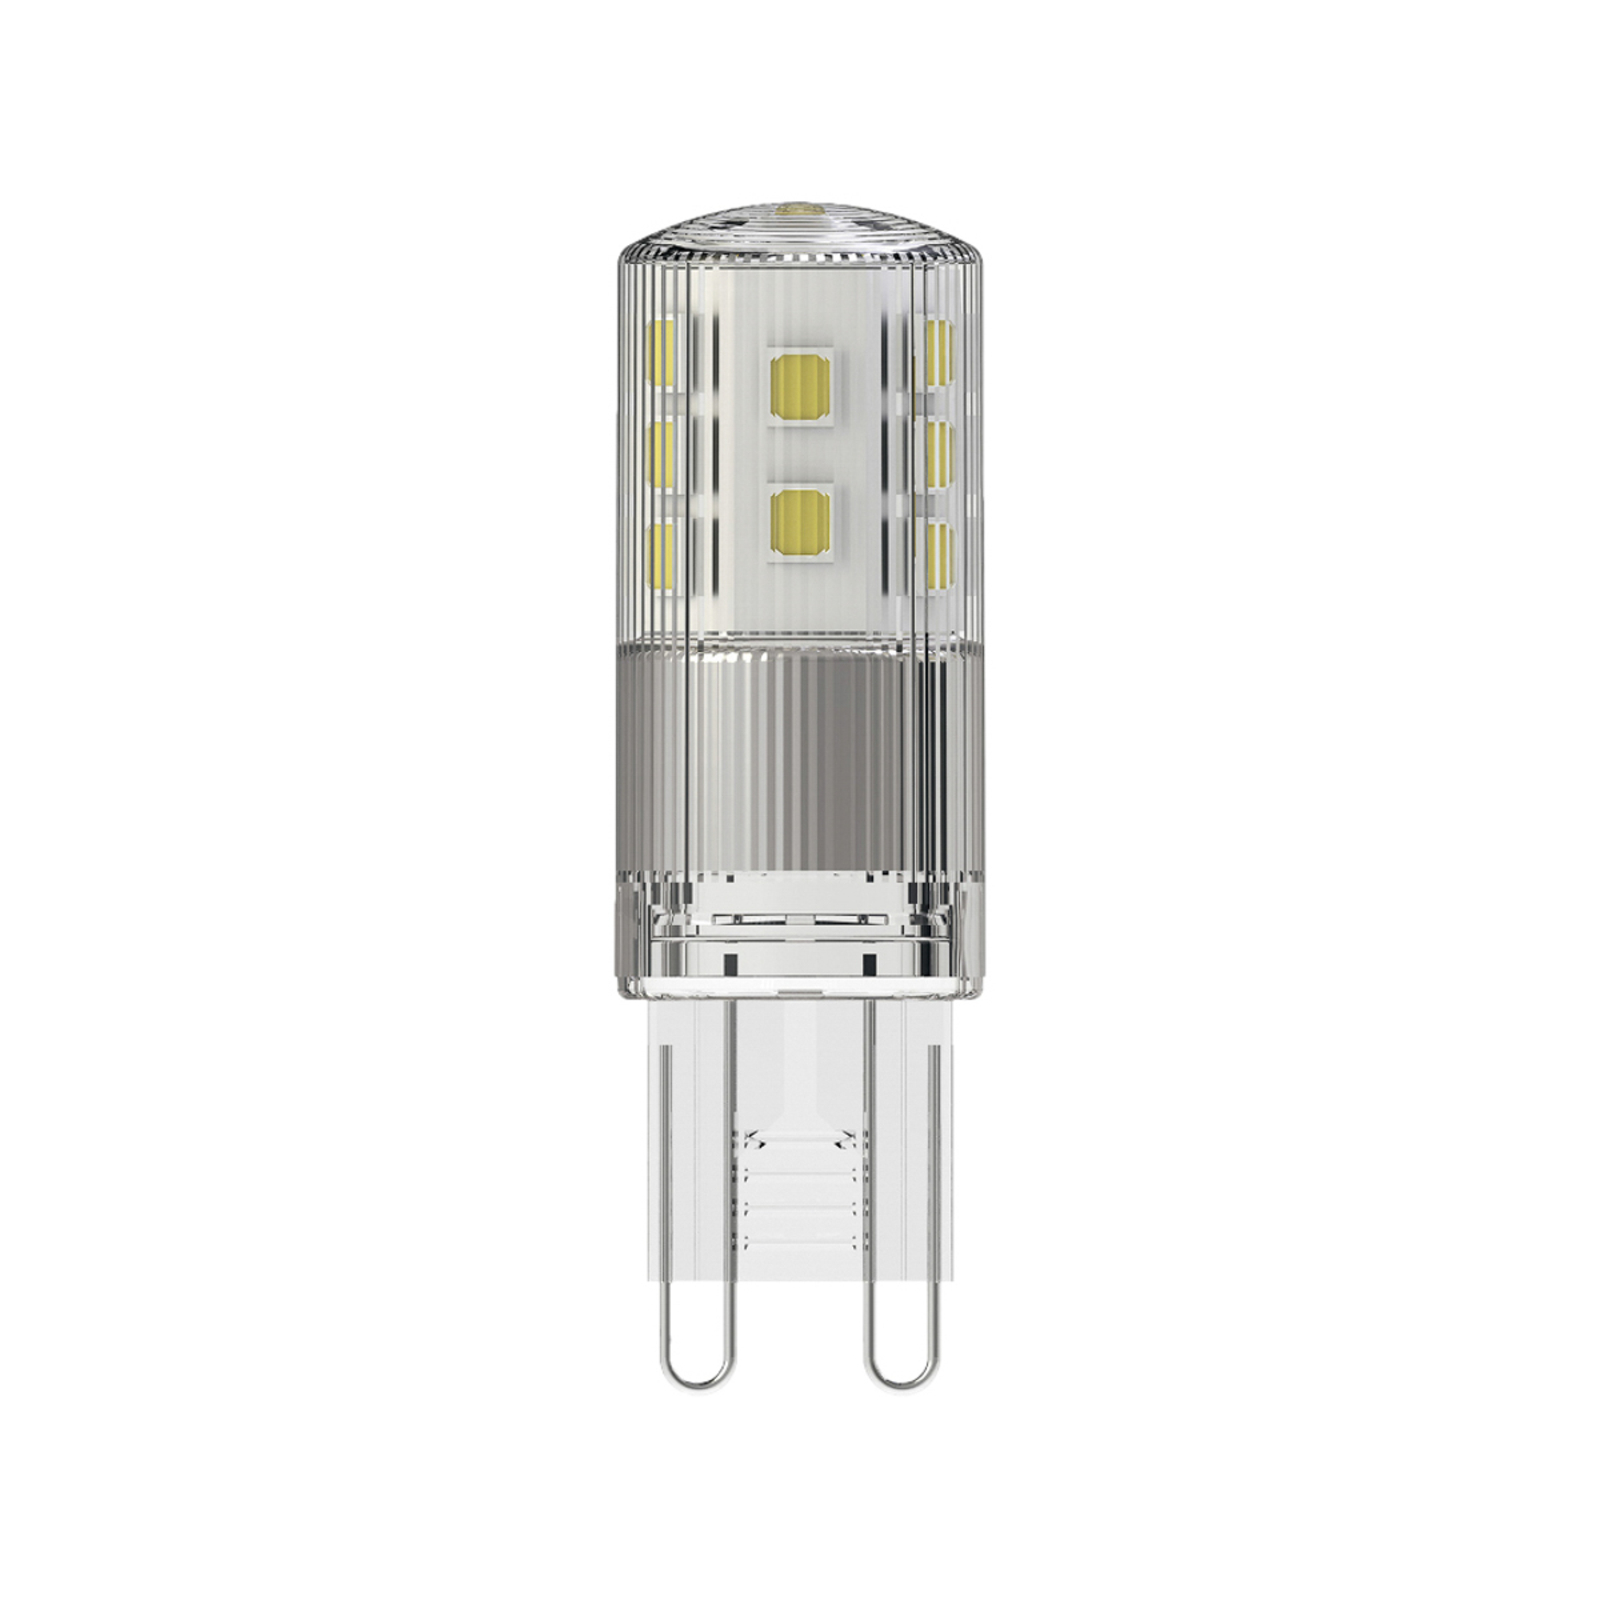 Radium LED Star PIN G9 3 W 320 lm 2,700 K dimmable